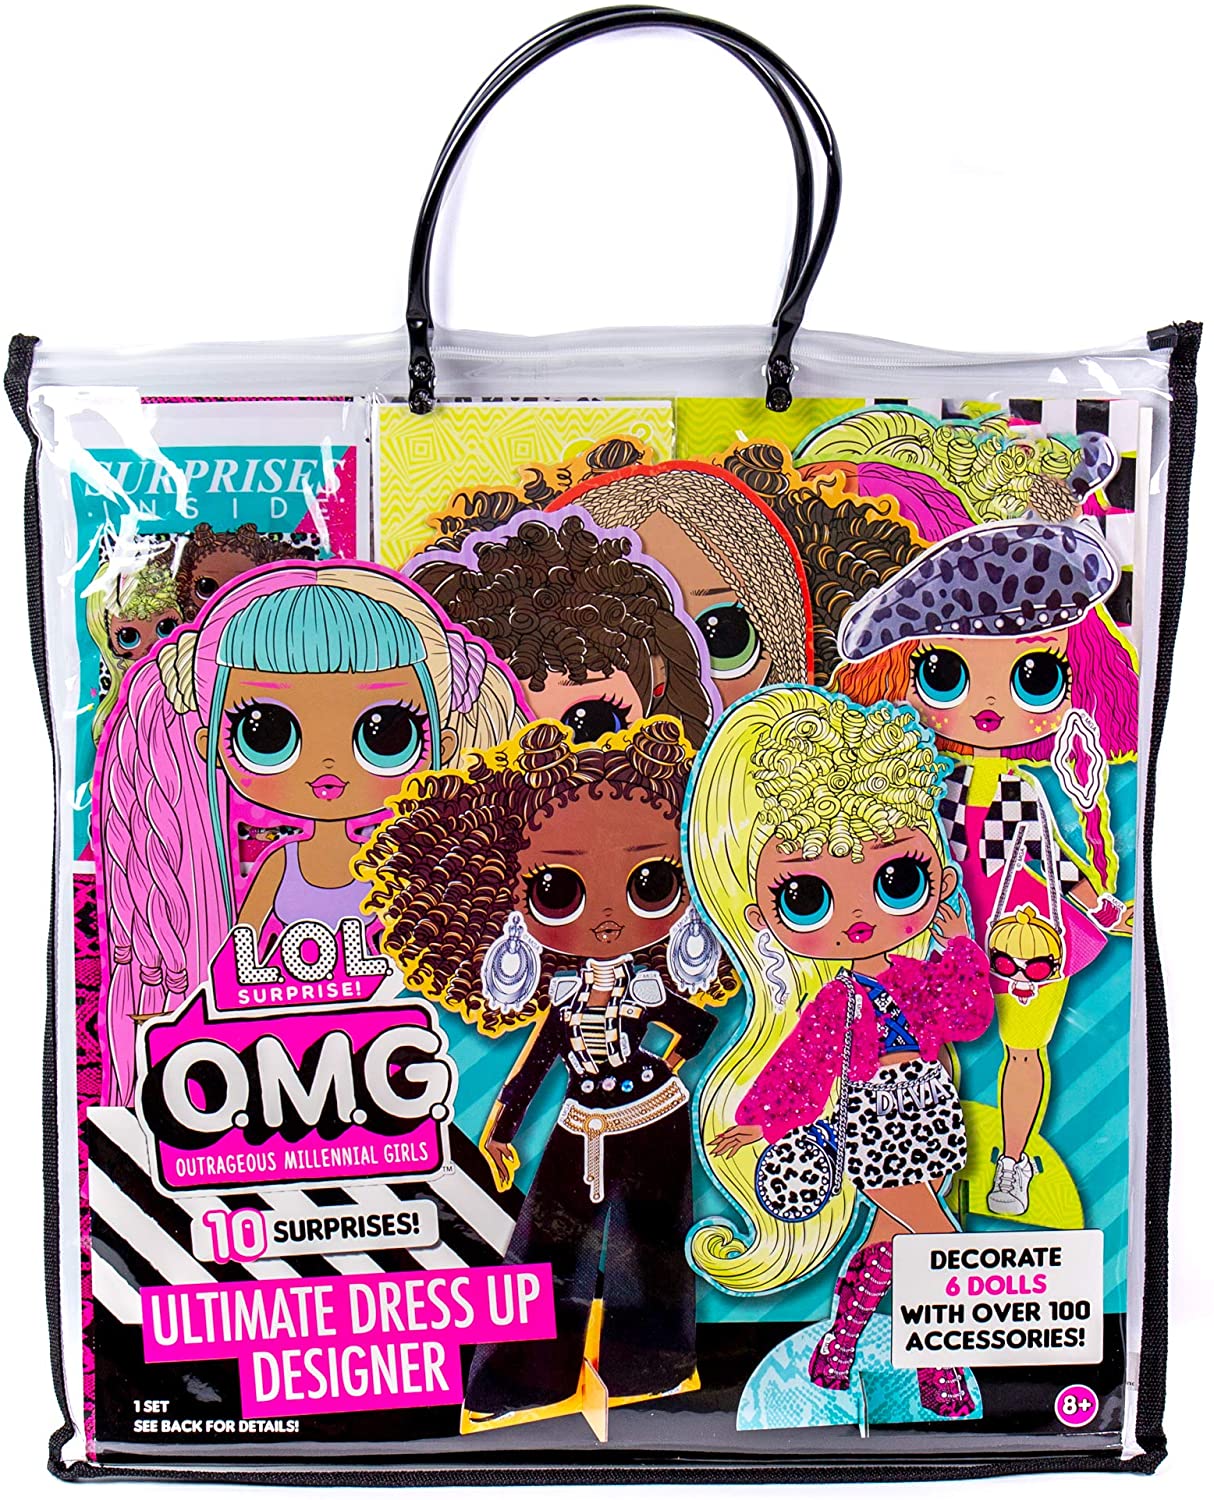 L.O.L Surprise! OMG Ultimate Dress Up Designer Craft Kit w/ 100-Accessories $9.92 + Free Shipping w/ Prime or on $25+